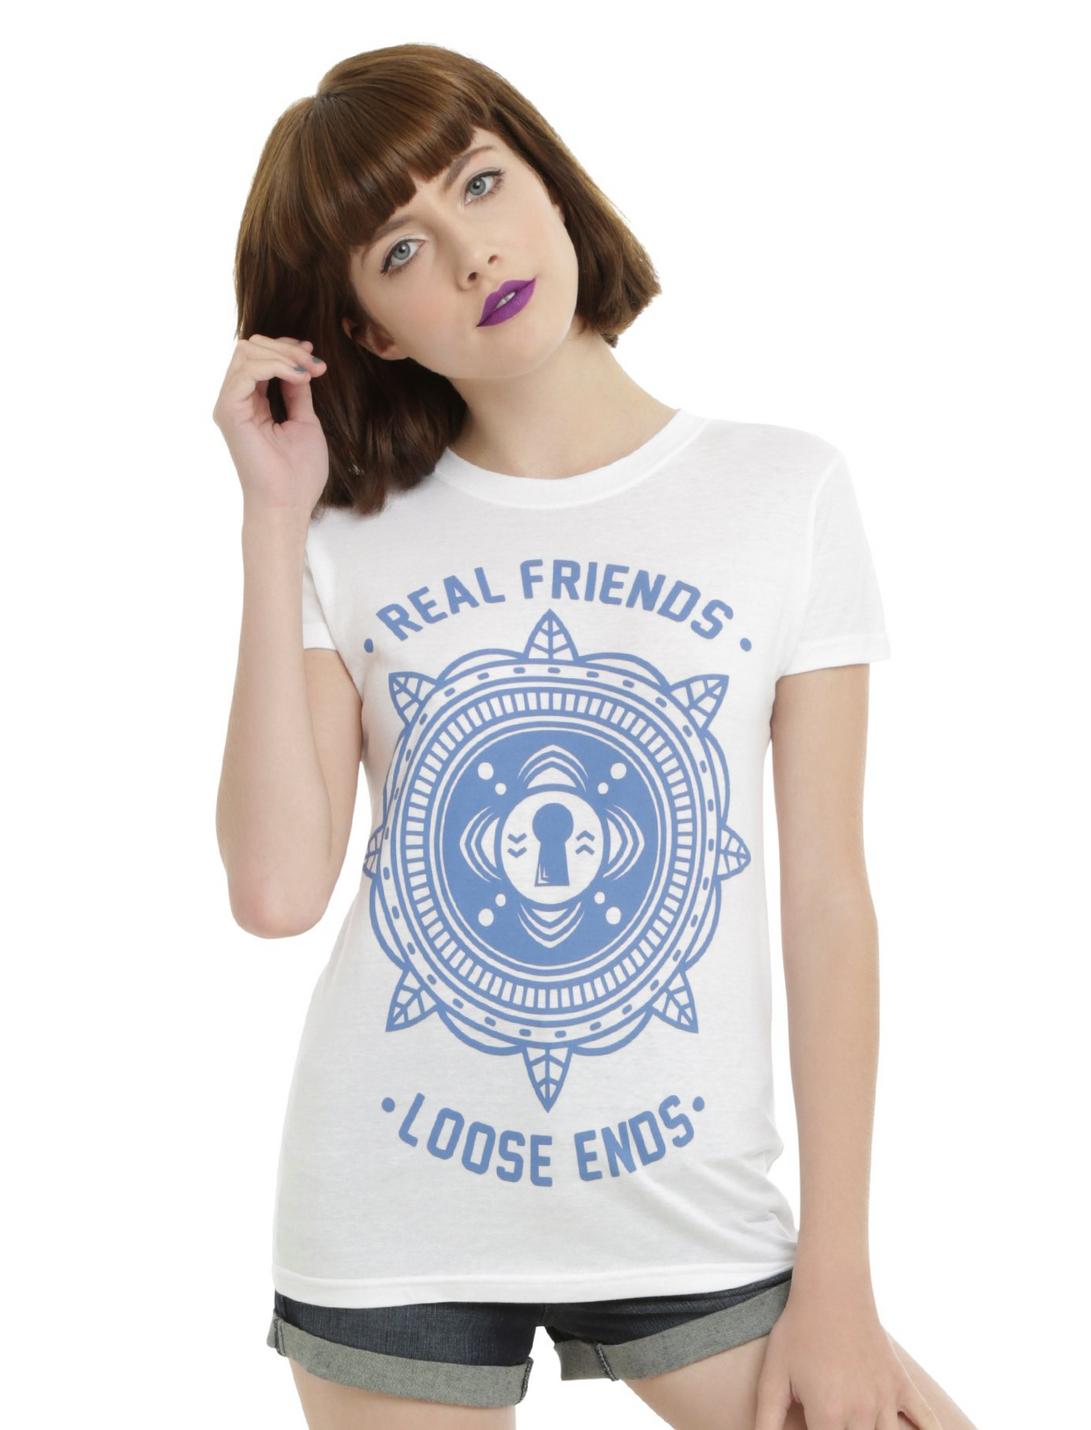 Real Friends Loose Ends Girls T-Shirt, WHITE, hi-res